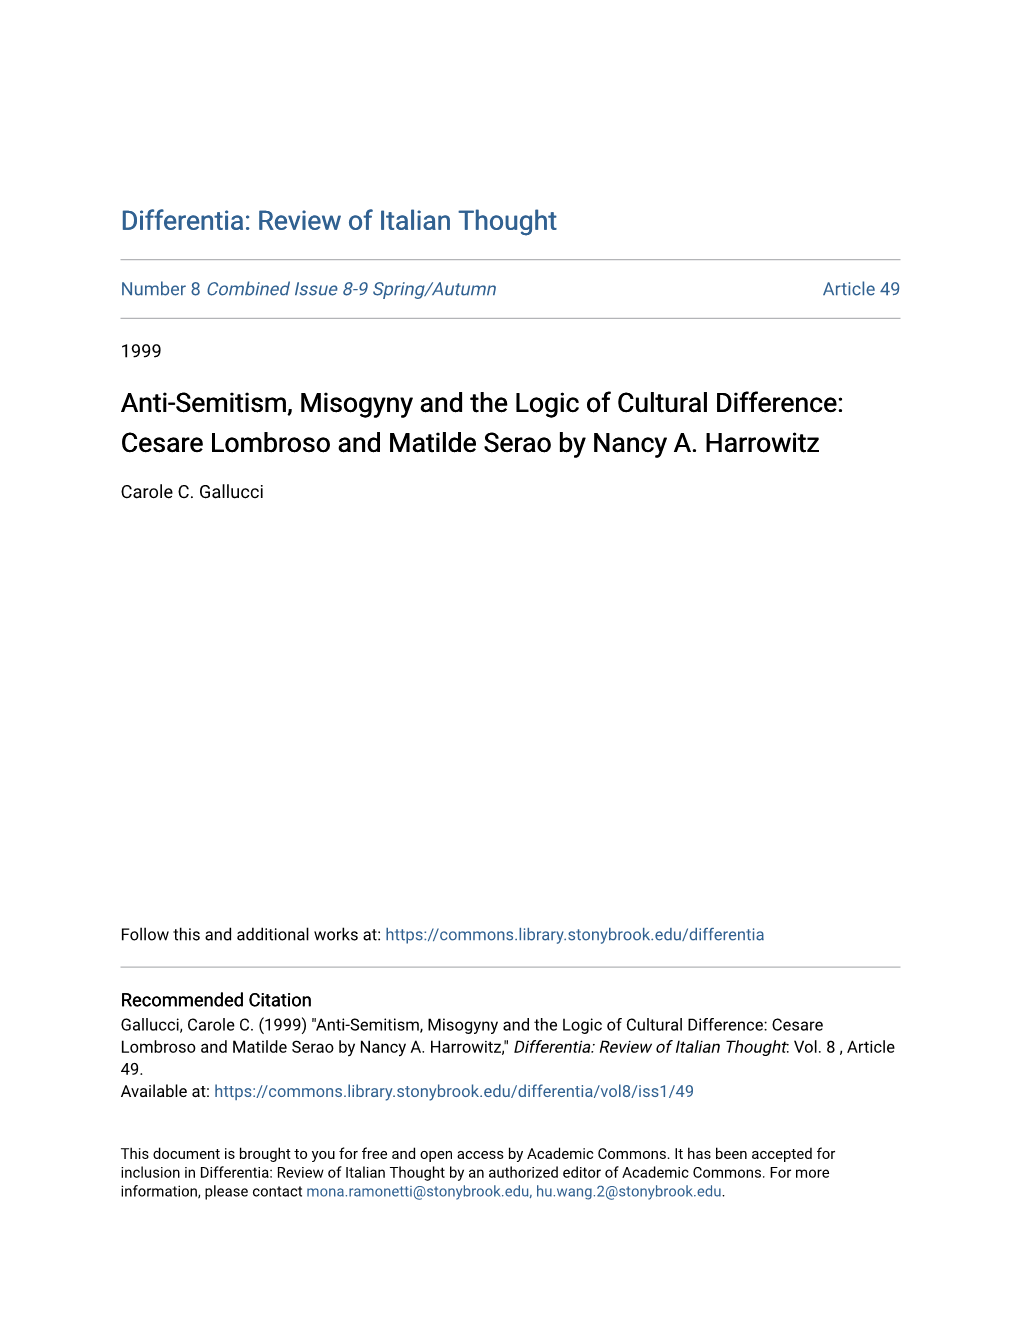 Anti-Semitism, Misogyny and the Logic of Cultural Difference: Cesare Lombroso and Matilde Serao by Nancy A. Harrowitz